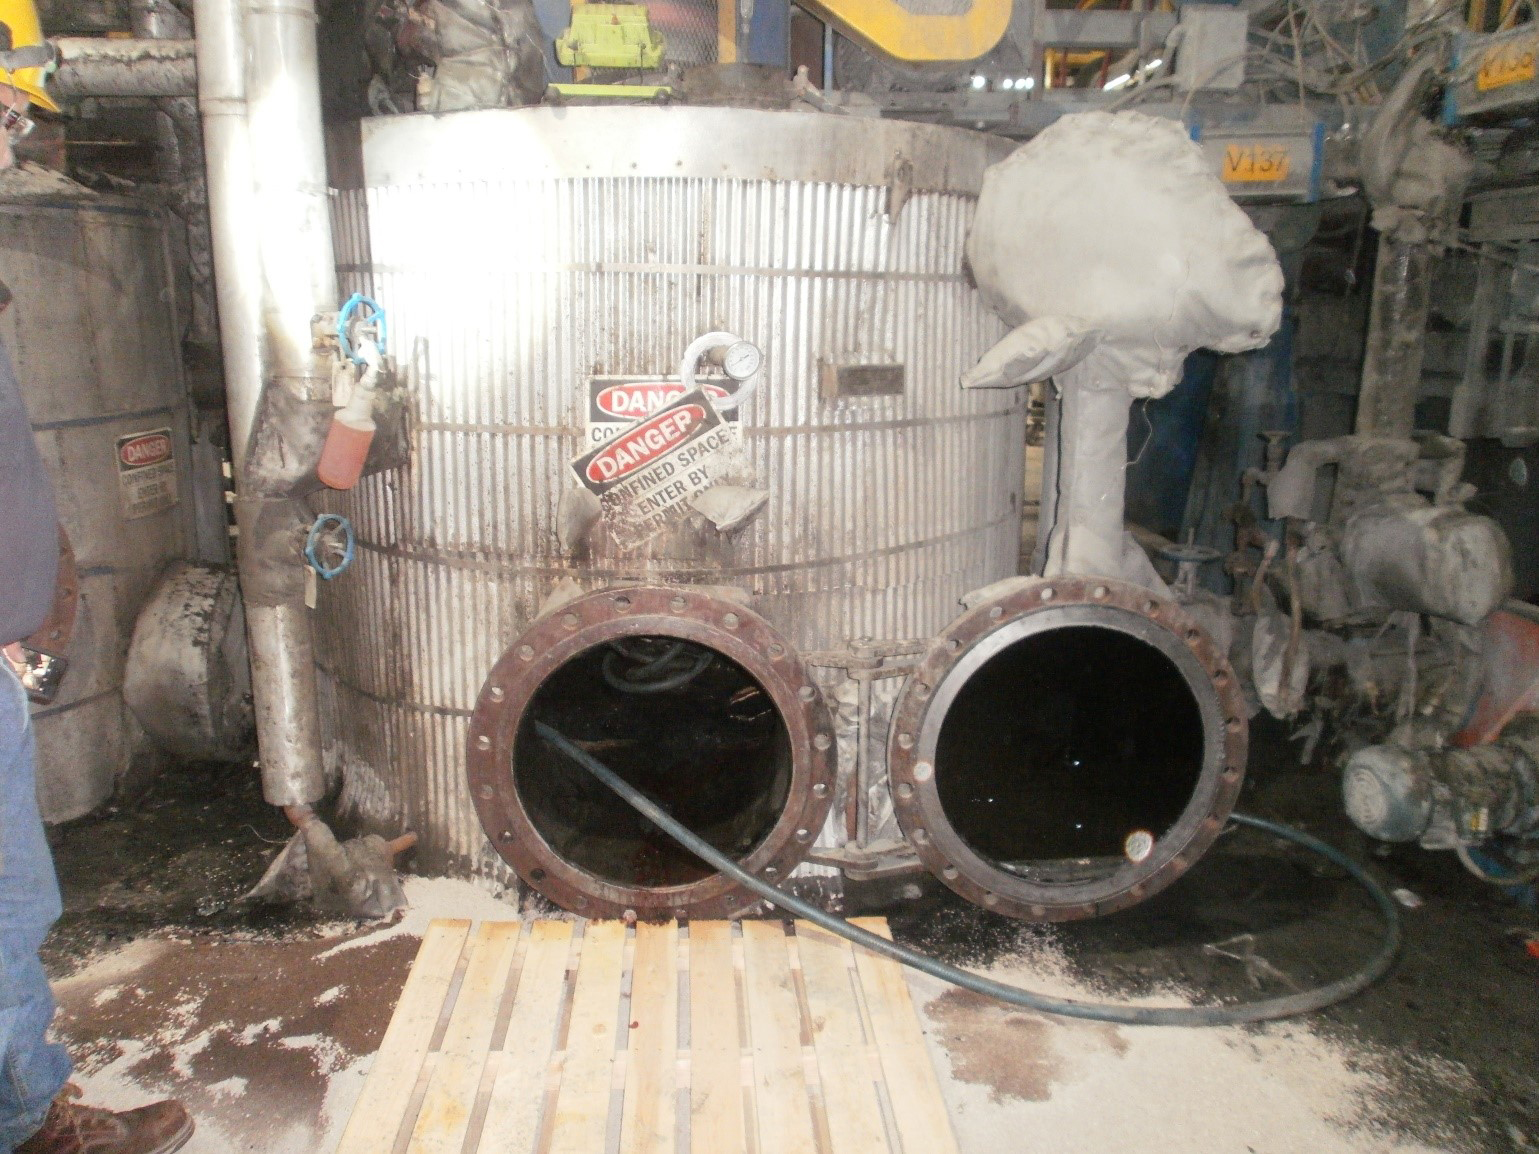 A view of the tank from the outside showing the small entry and exit opening. The power source of this tank was not properly locked out and a worker was killed while inside this confined space when it suddenly turned on.